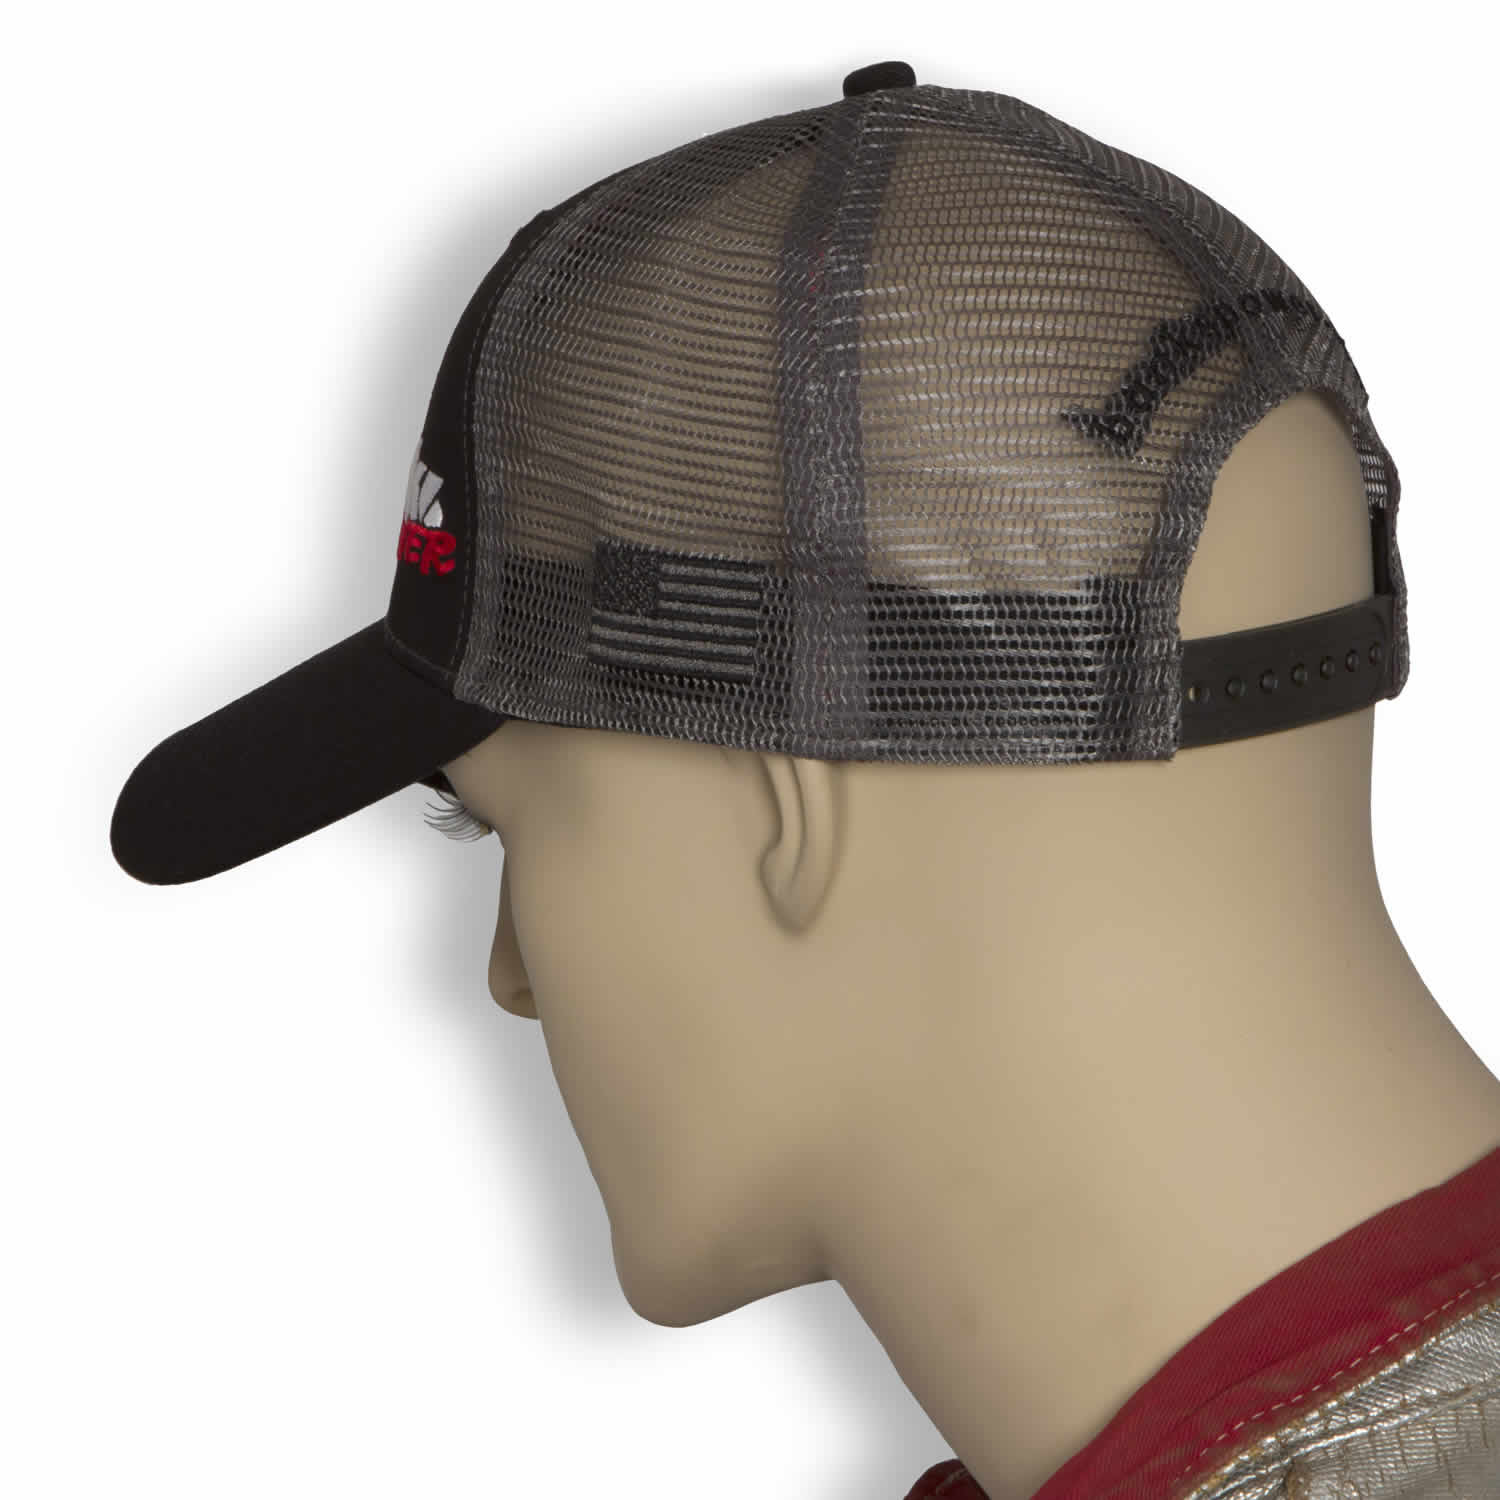 Power Hat Twill/Mesh Black/Gray/WhiteRed Curved Bill Snap Backstrap Banks Power